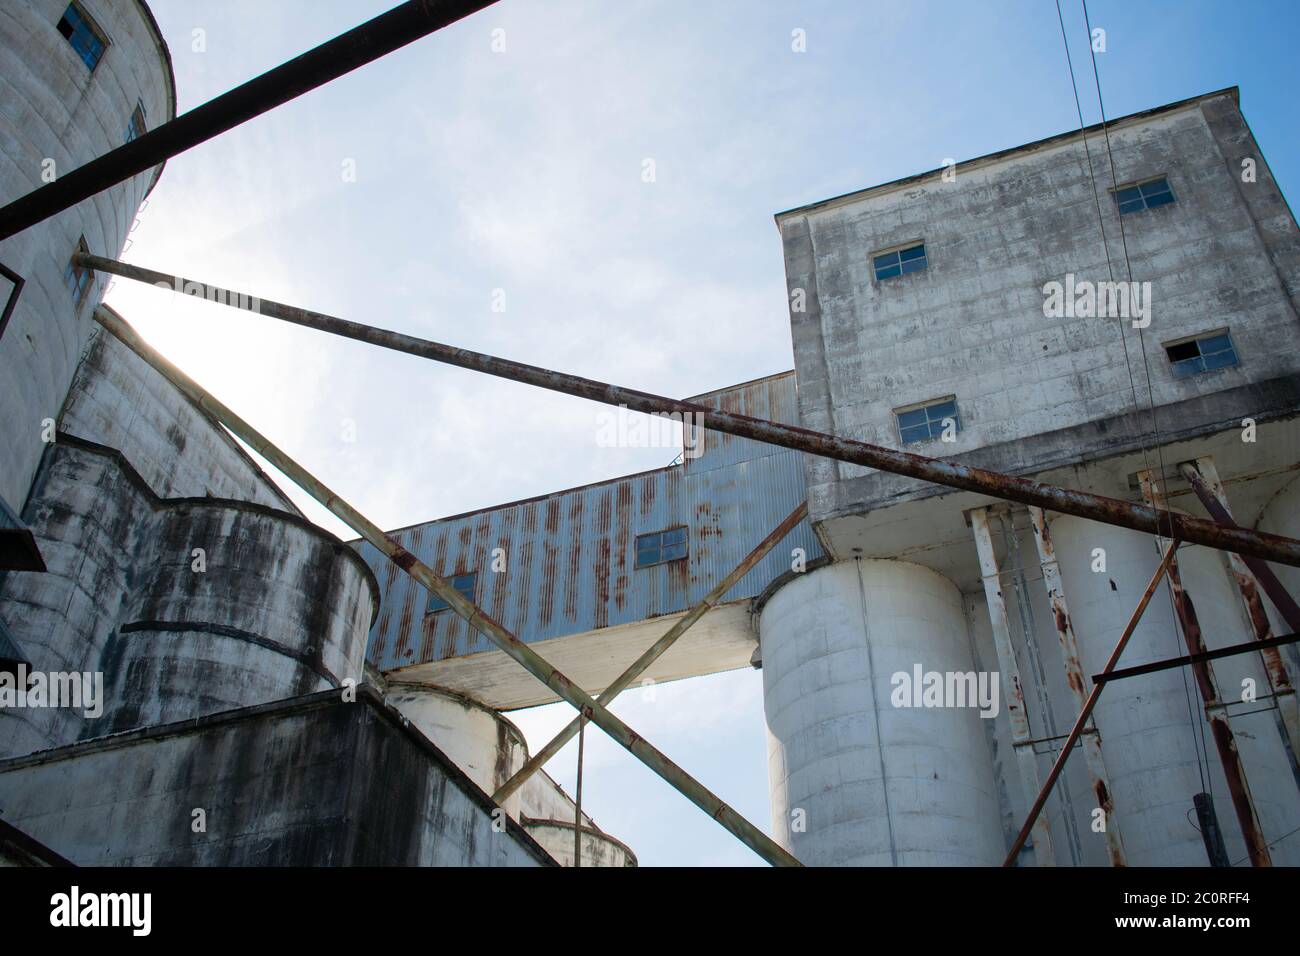 No Label Brewery Site in Katy, Texas Stockfoto